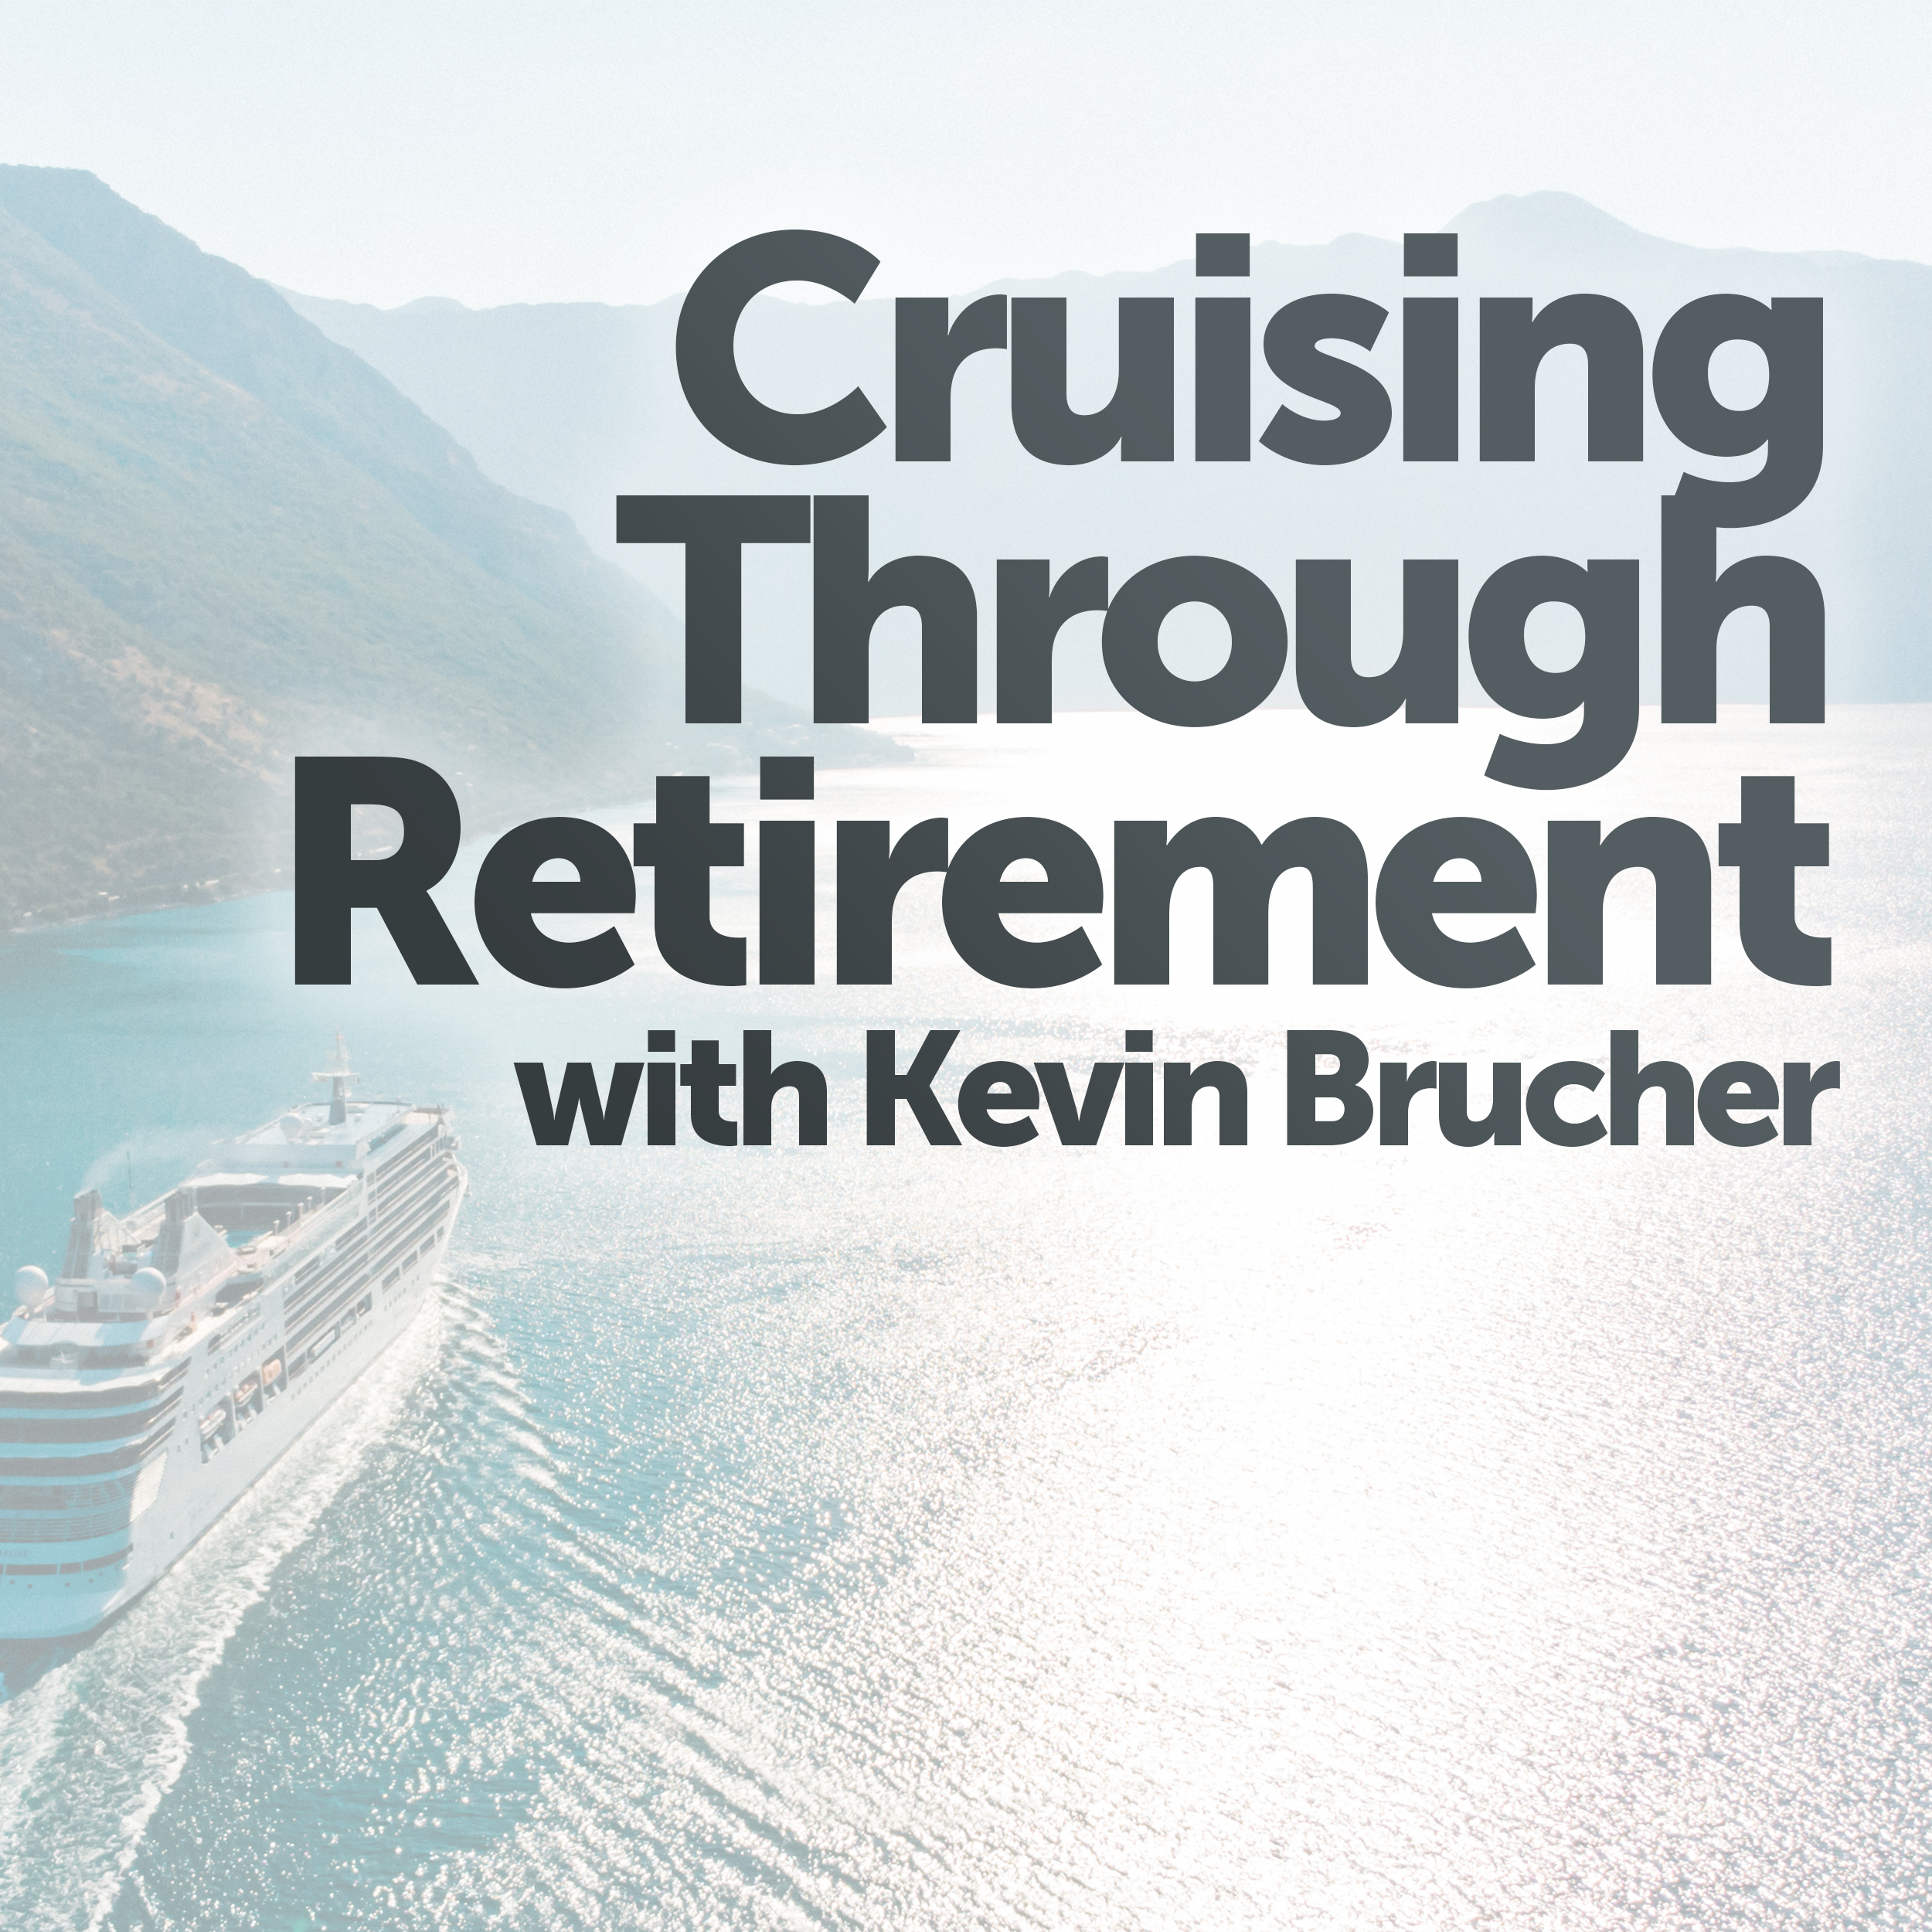 Kevin Brucher discusses common retirement blunders and provide suggestions on how to avoid them.